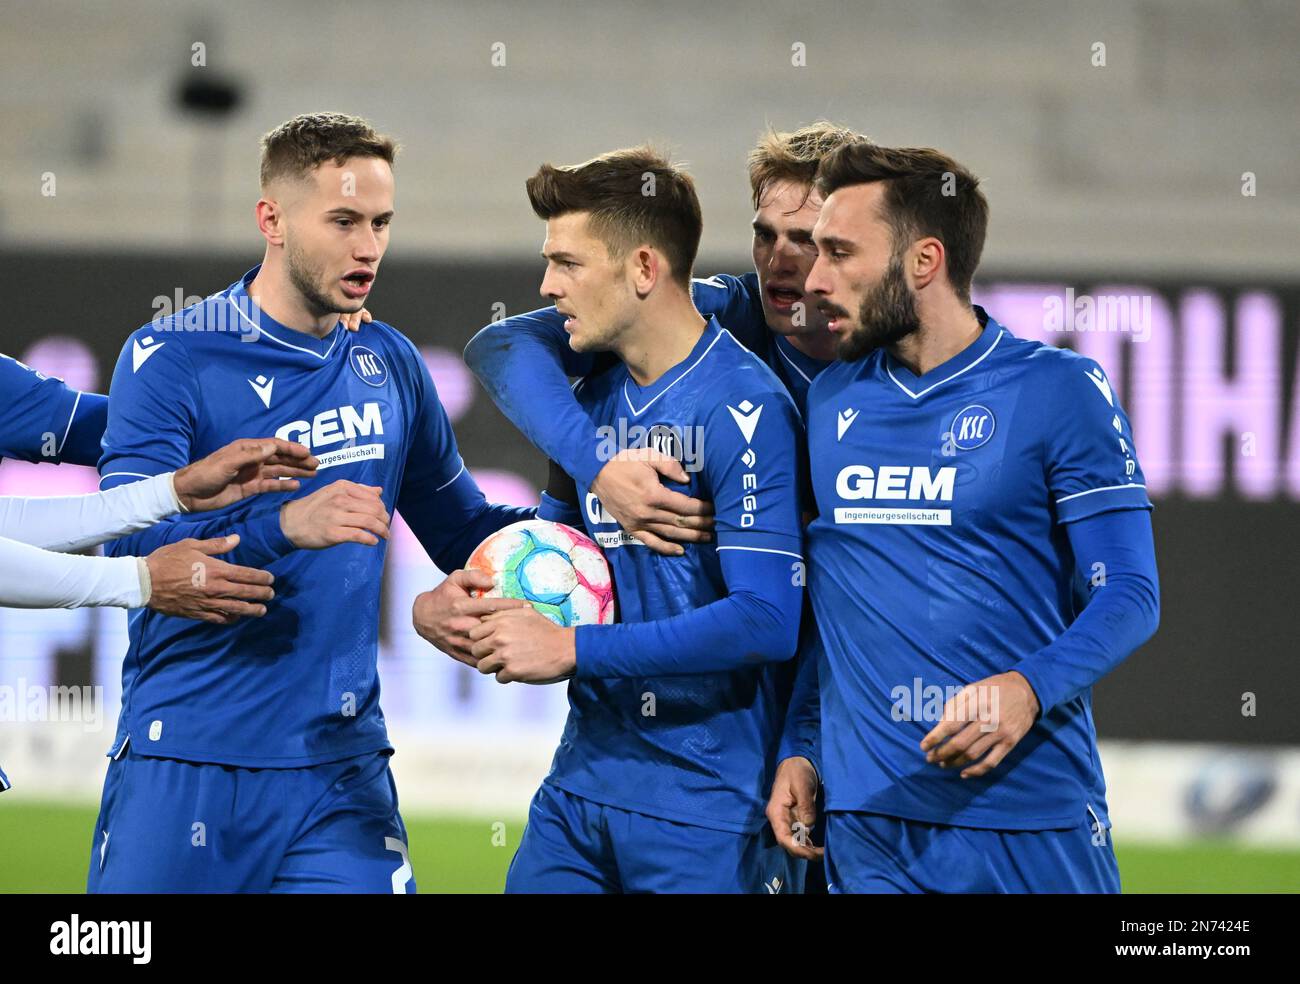 Karlsruhe, Germany. 10th Feb, 2023. Soccer: 2nd Bundesliga, Karlsruher SC - SpVgg Greuther Fürth, Matchday 20, at BBBank Wildpark. Karlsruhe's Marvin Wanitzek (M) celebrates his goal to make it 1:1 with Christoph Kobald (l-r), Mikkel Kaufmann and Fabian Schleusener. Credit: Uli Deck/dpa - IMPORTANT NOTE: In accordance with the requirements of the DFL Deutsche Fußball Liga and the DFB Deutscher Fußball-Bund, it is prohibited to use or have used photographs taken in the stadium and/or of the match in the form of sequence pictures and/or video-like photo series./dpa/Alamy Live News Stock Photo